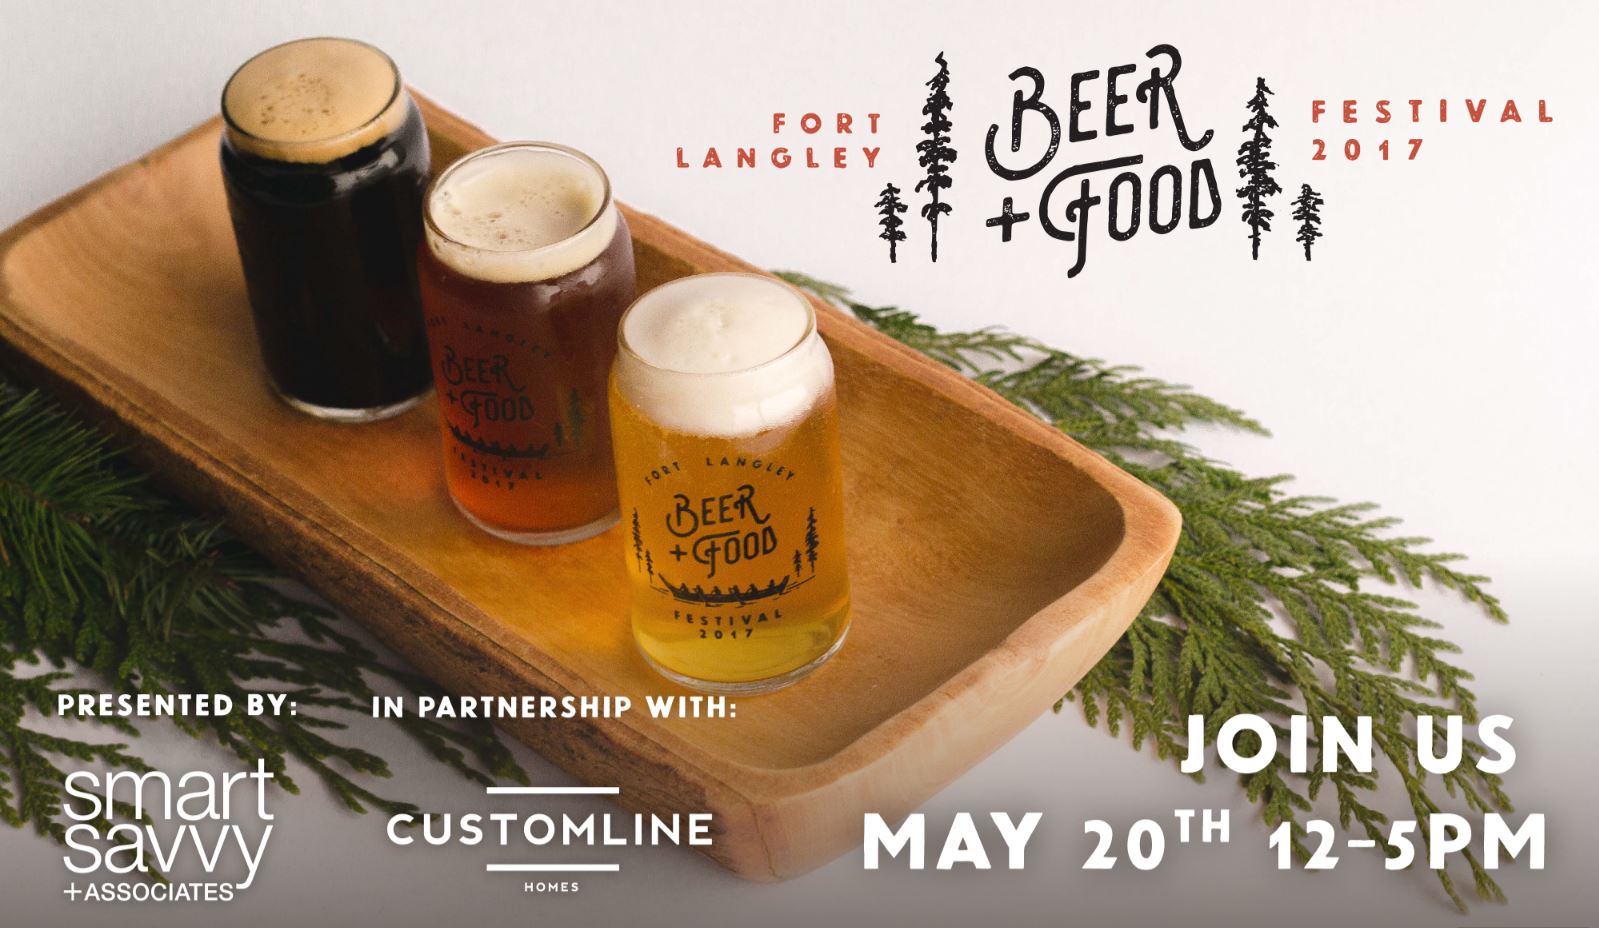 A Craft Beer Feasting Festival In Fort Langley | Beer Me British Columbia